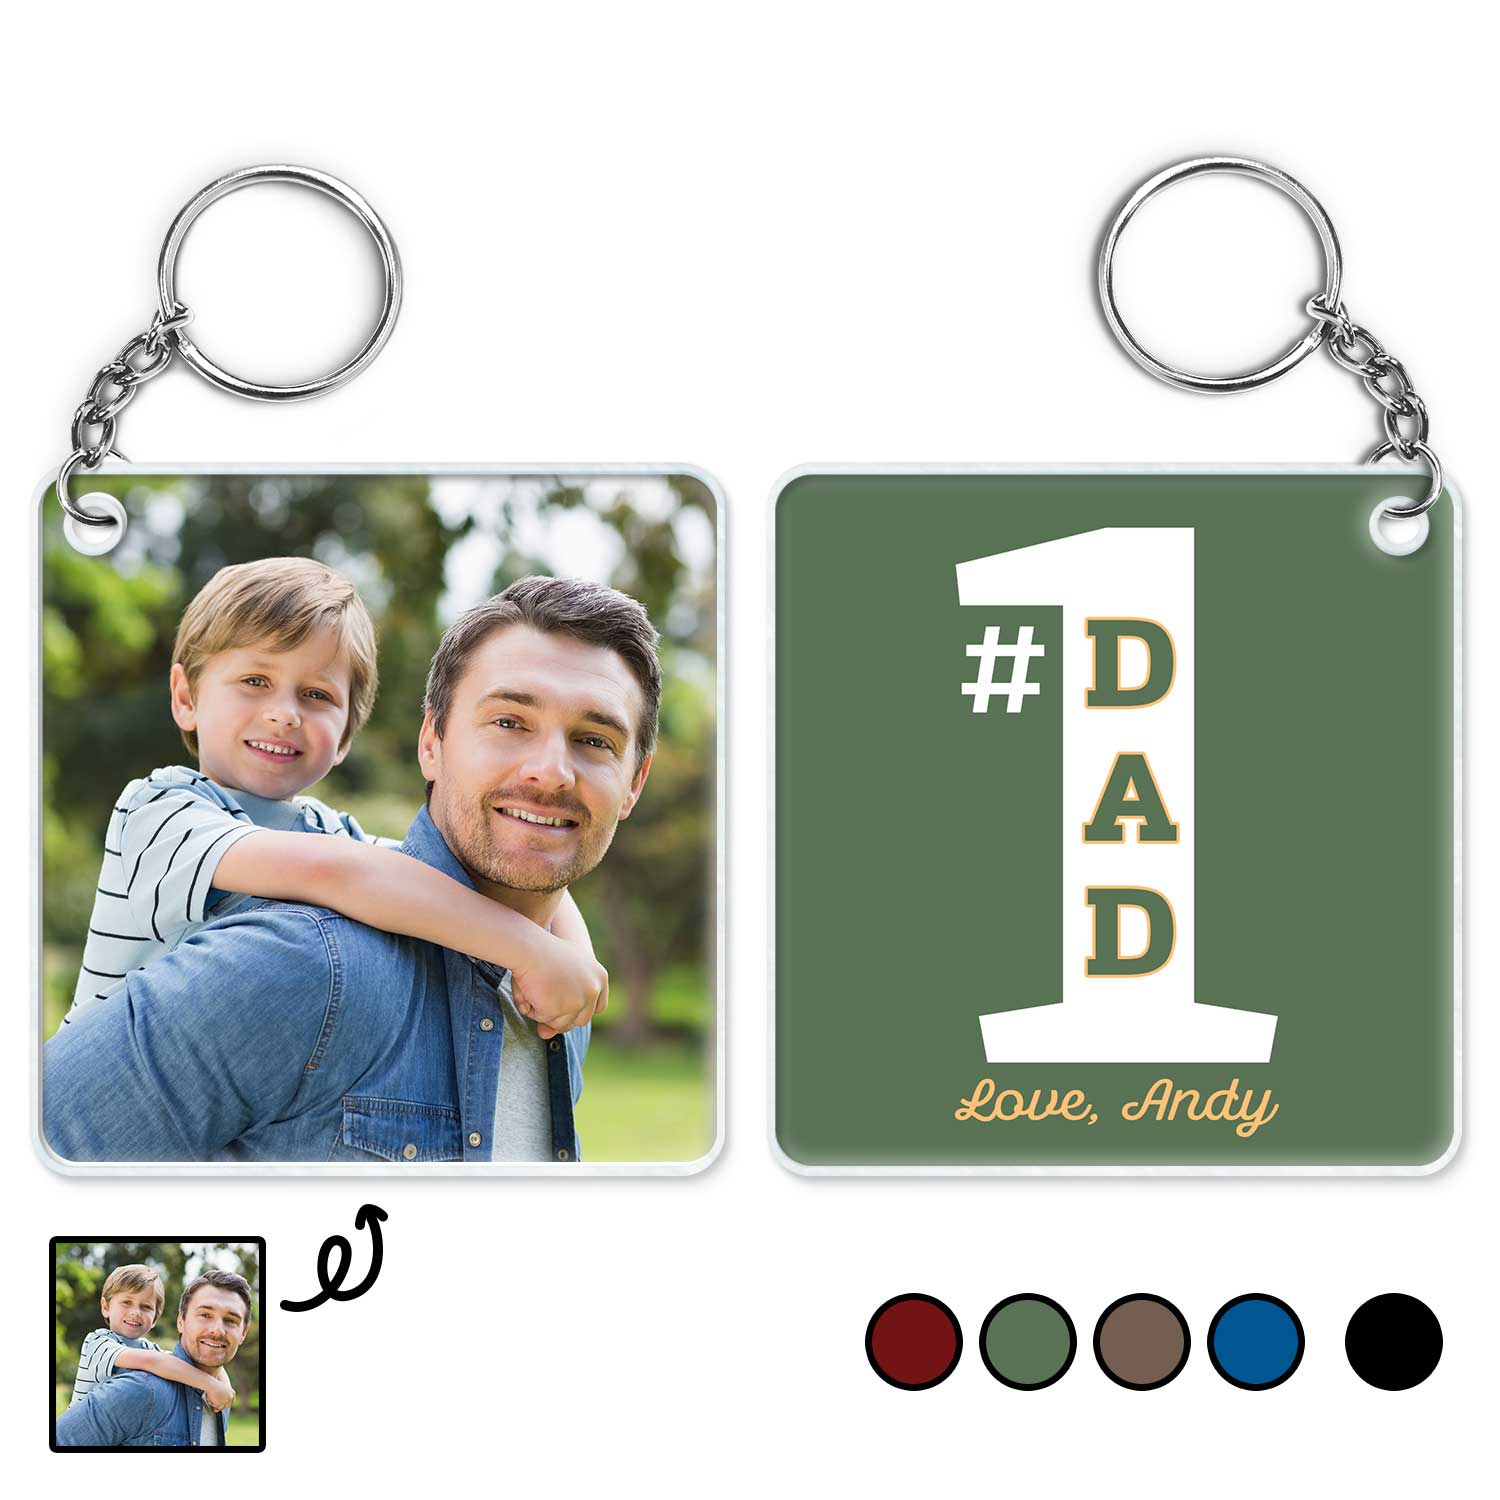 Personalized Metal Fishing Keychain Grandpa's Keepers - Father's Day Gift